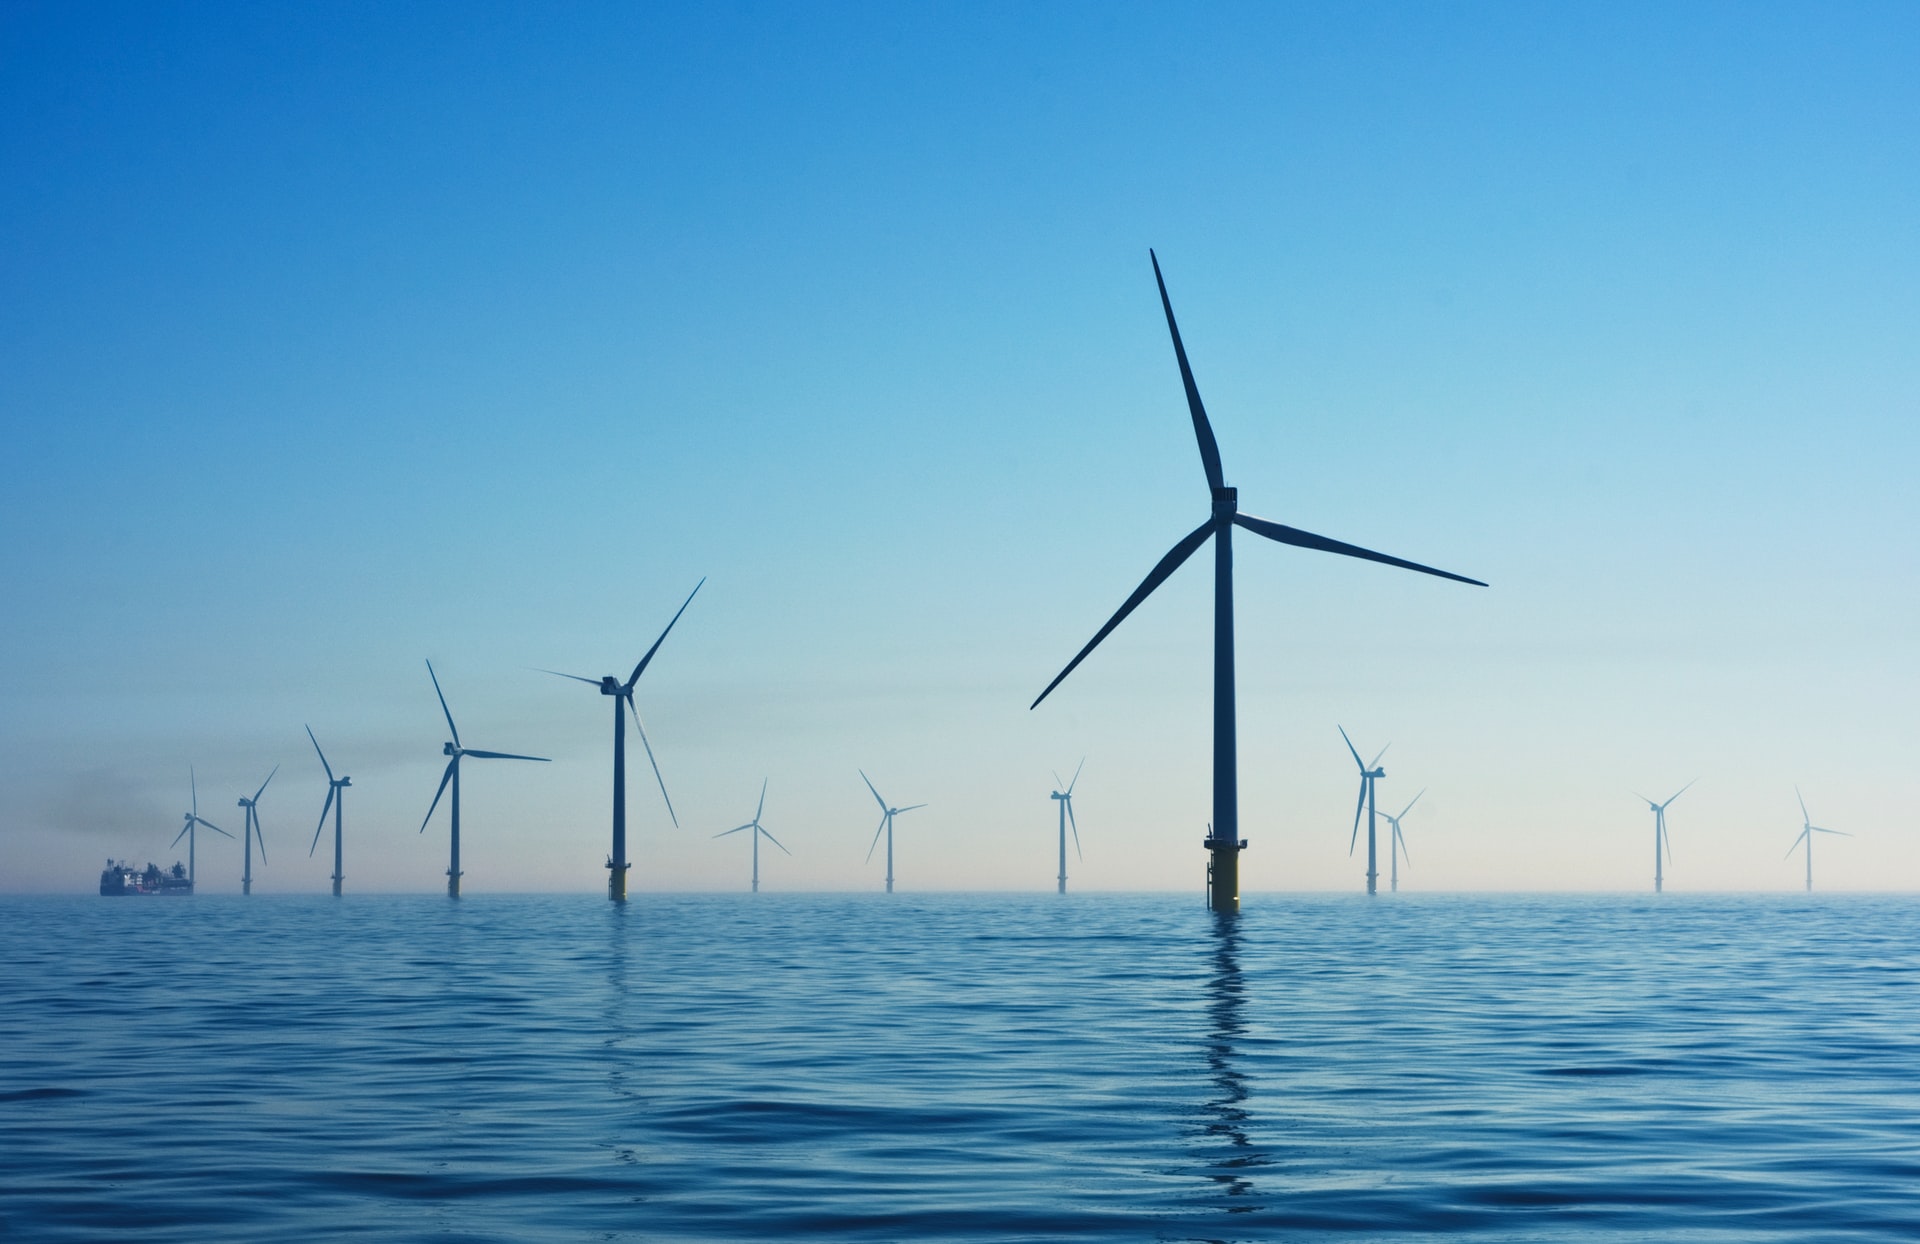 Siemens Gamesa bags contract to supply giant turbines to UK wind farm